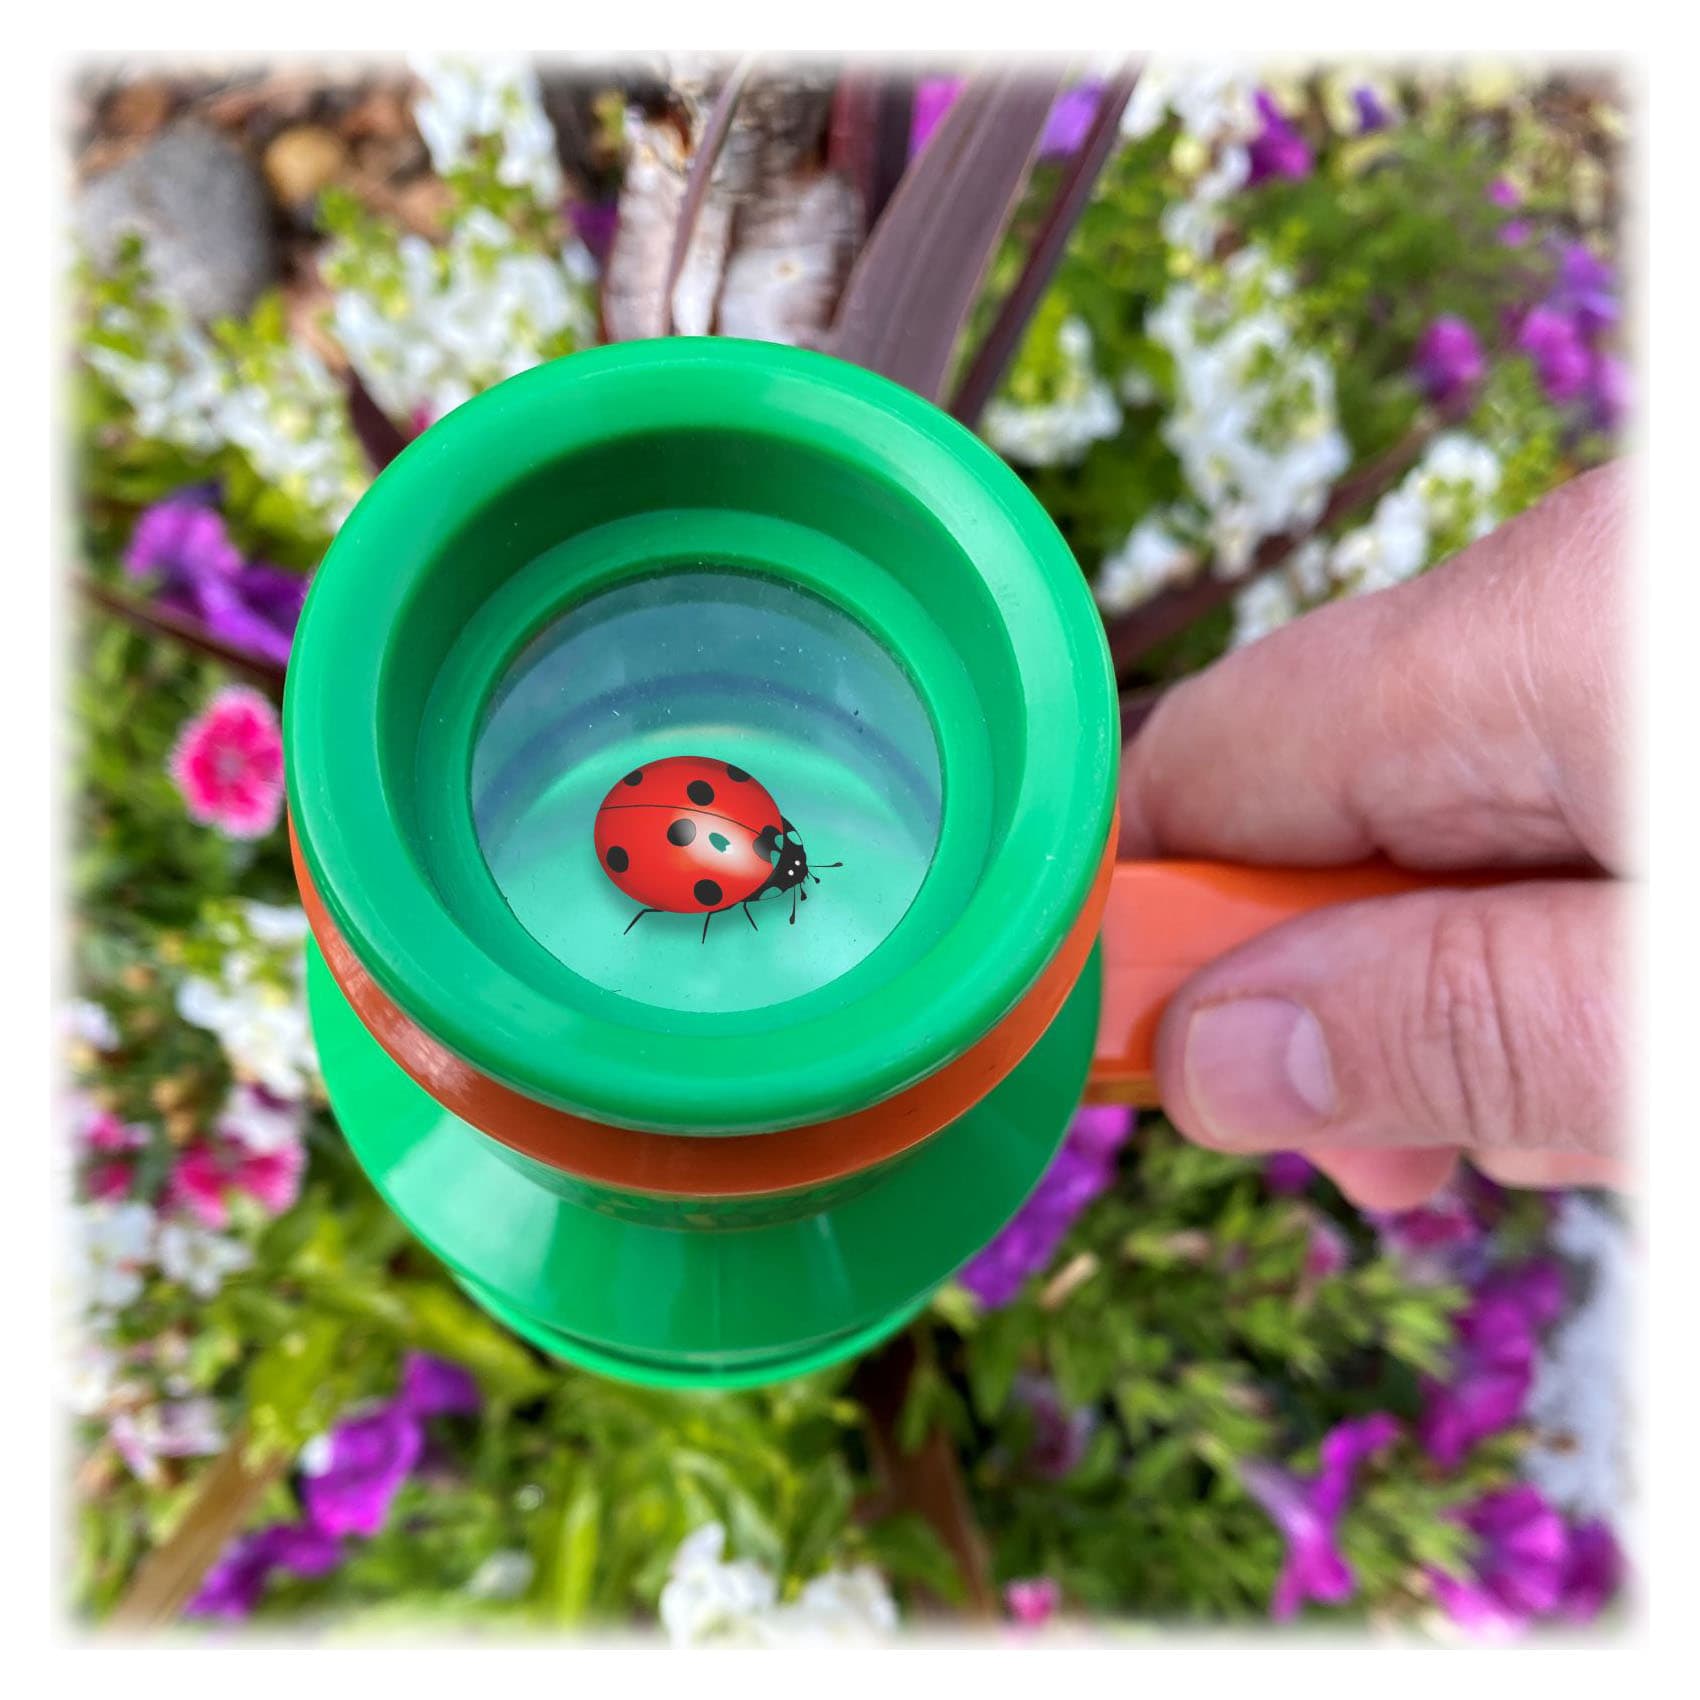 Nature Bound® Bug Catcher and Viewer